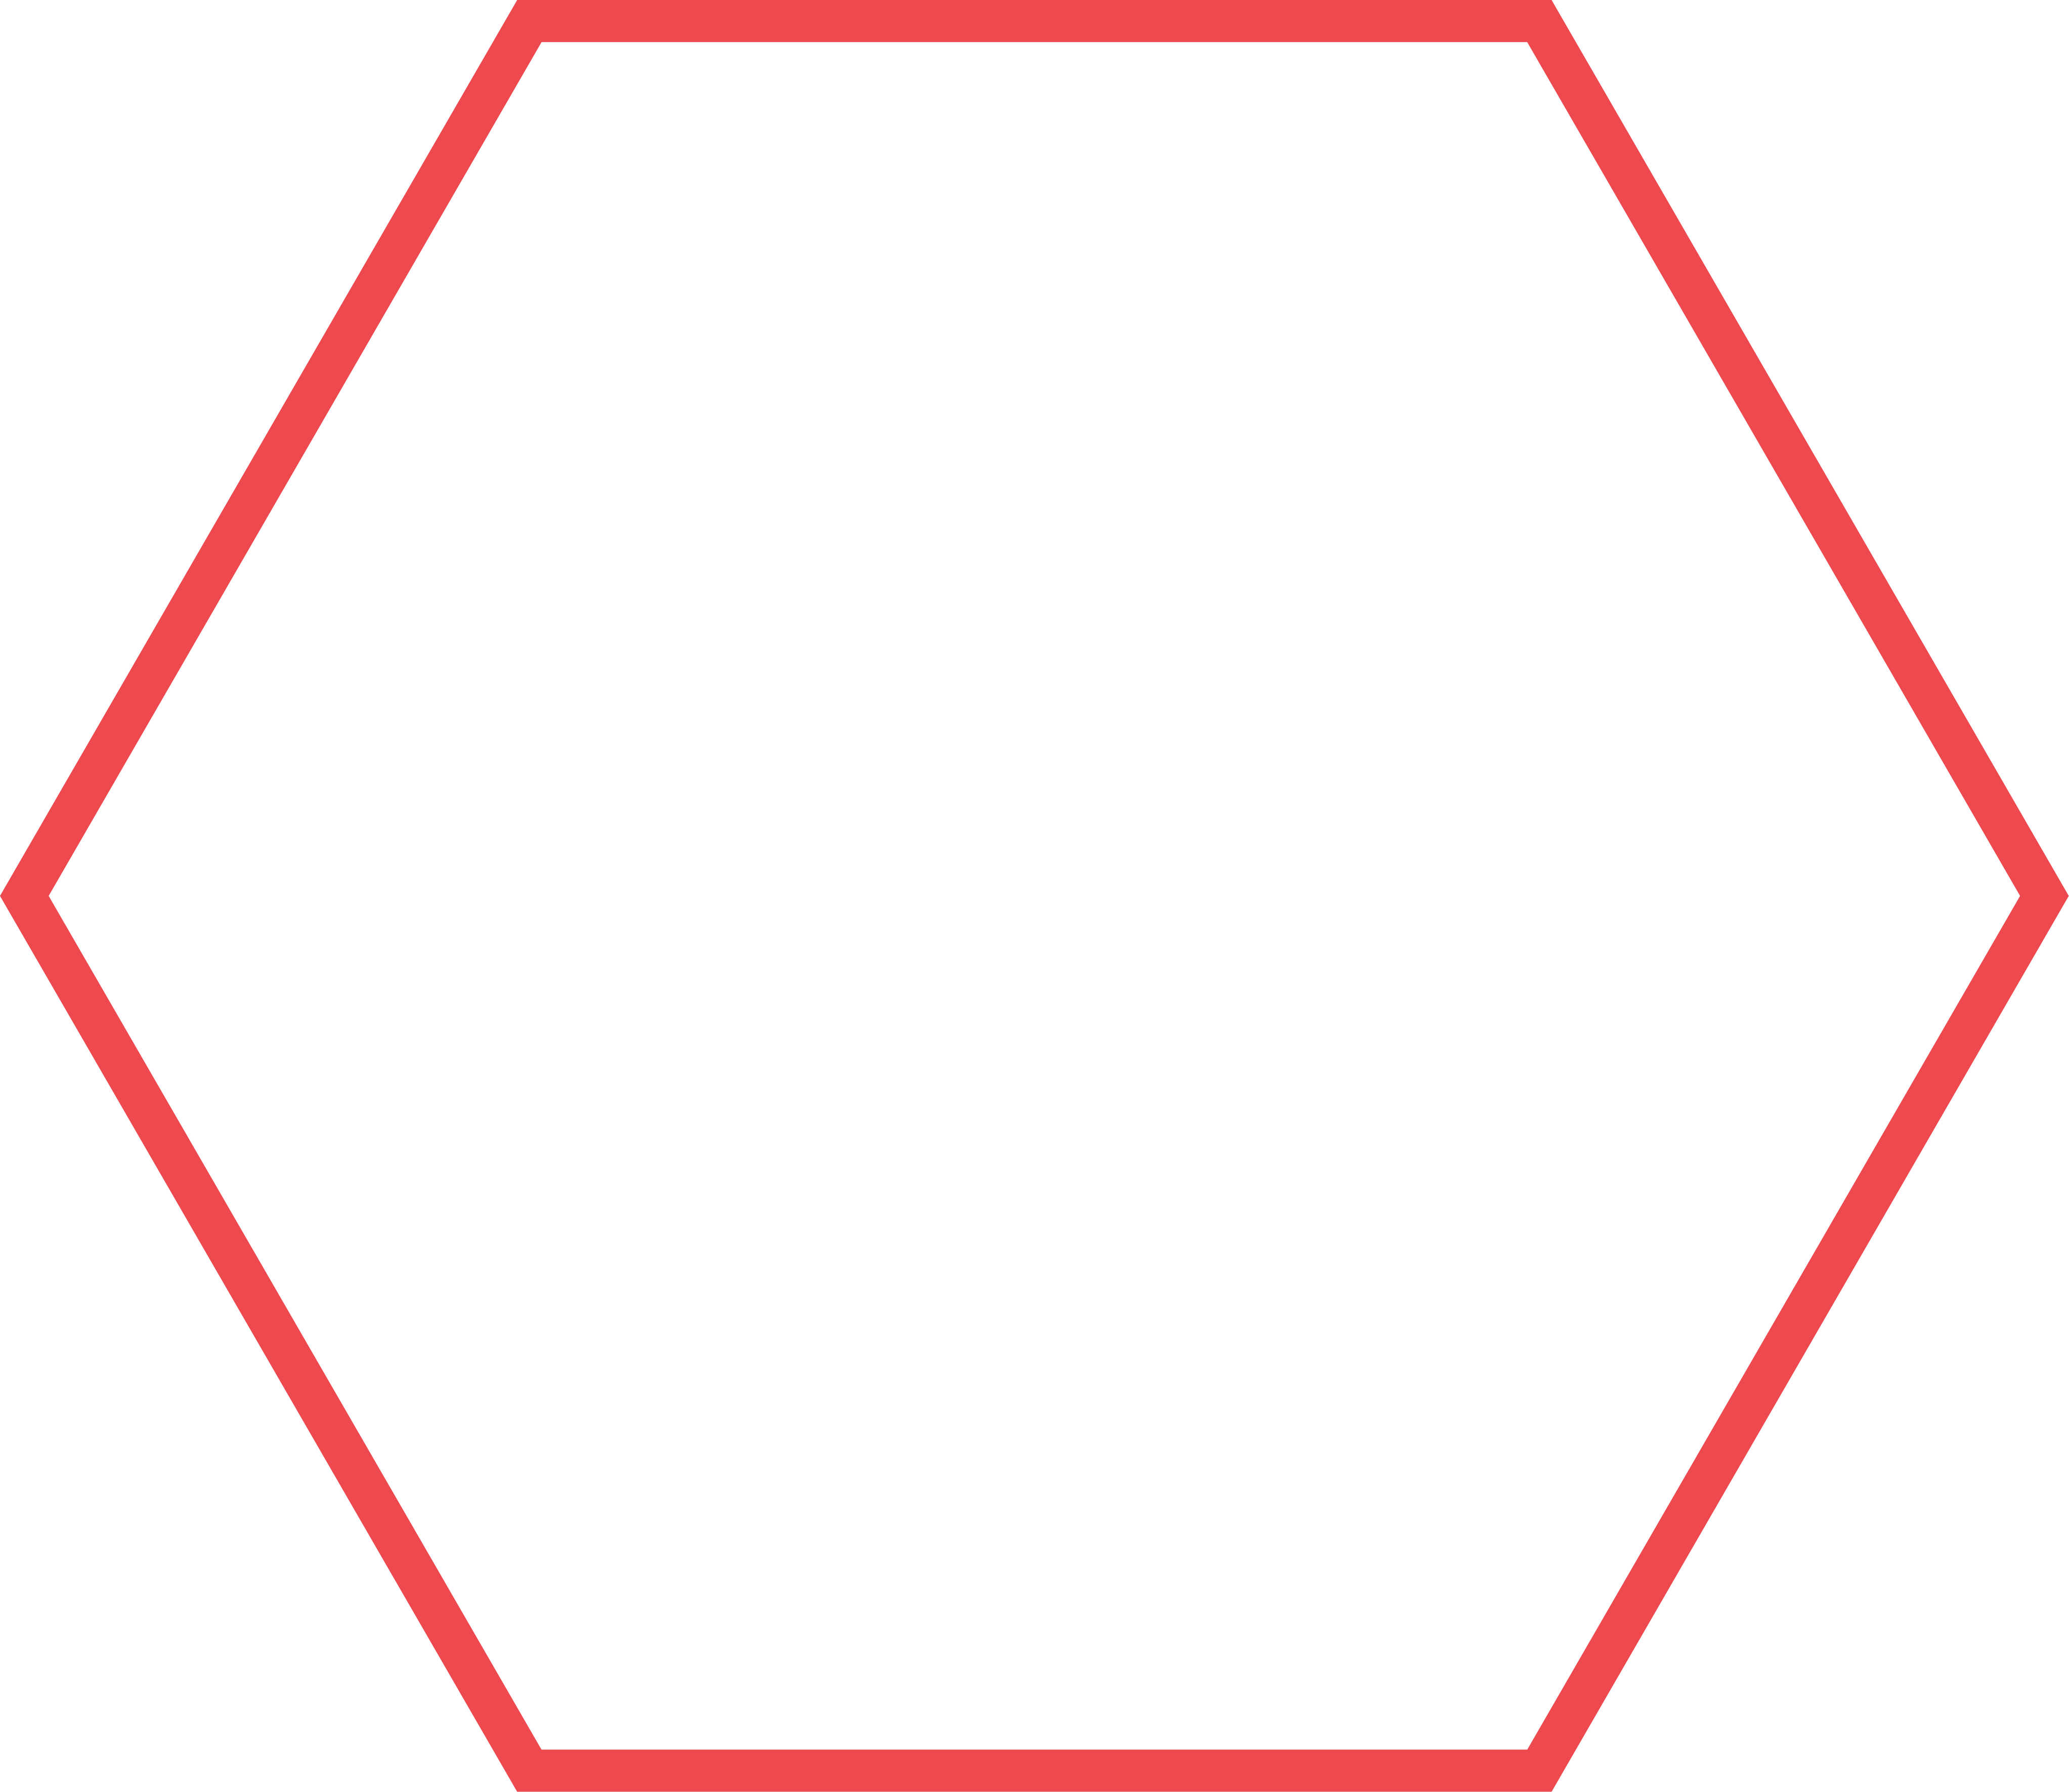 Shape free download best. Hexagon clipart red